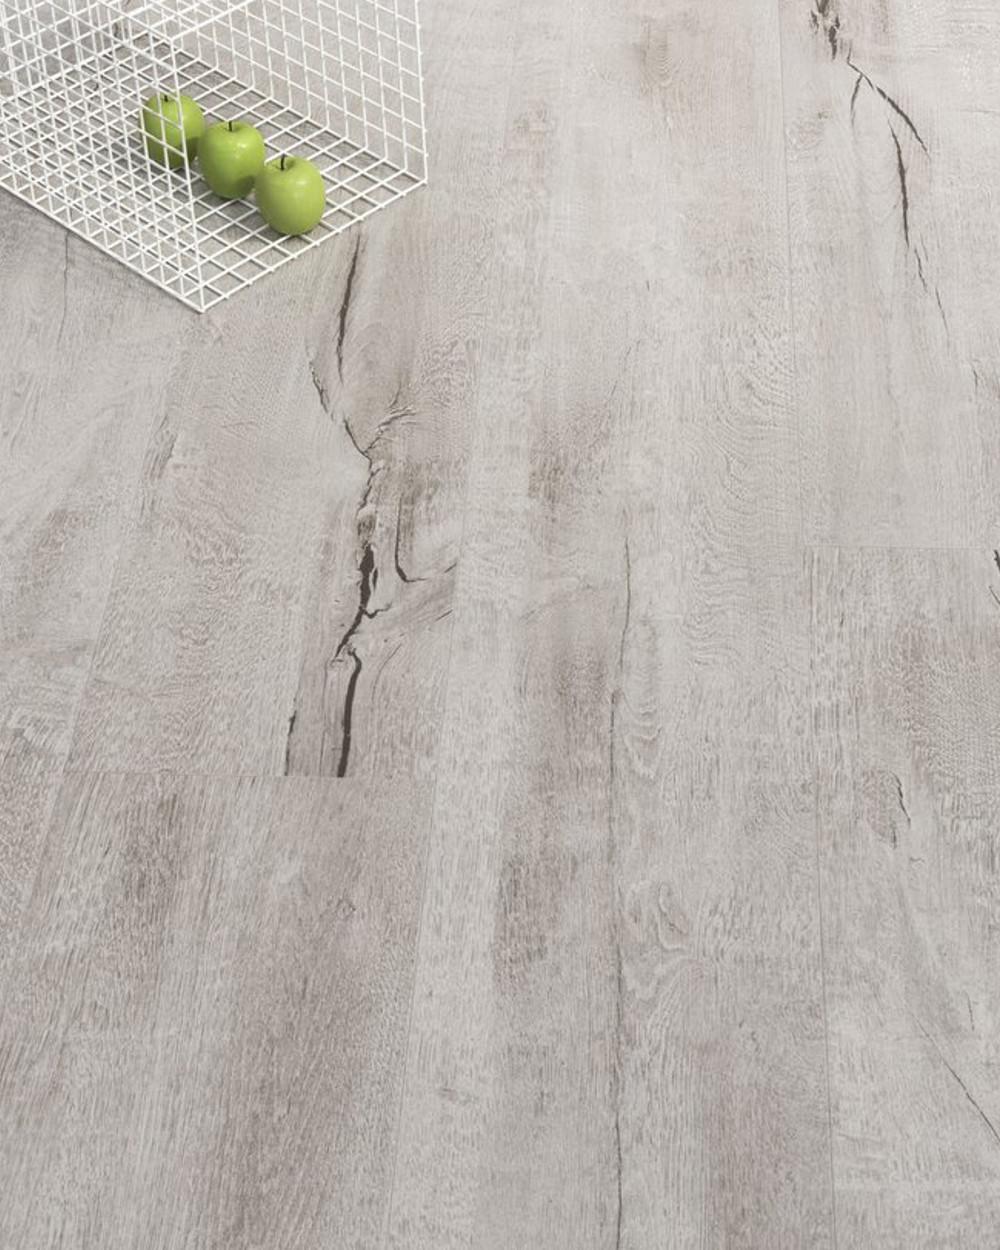 Timewood 30x120 cm Sant ’Agostino tiles in wood look order online now !